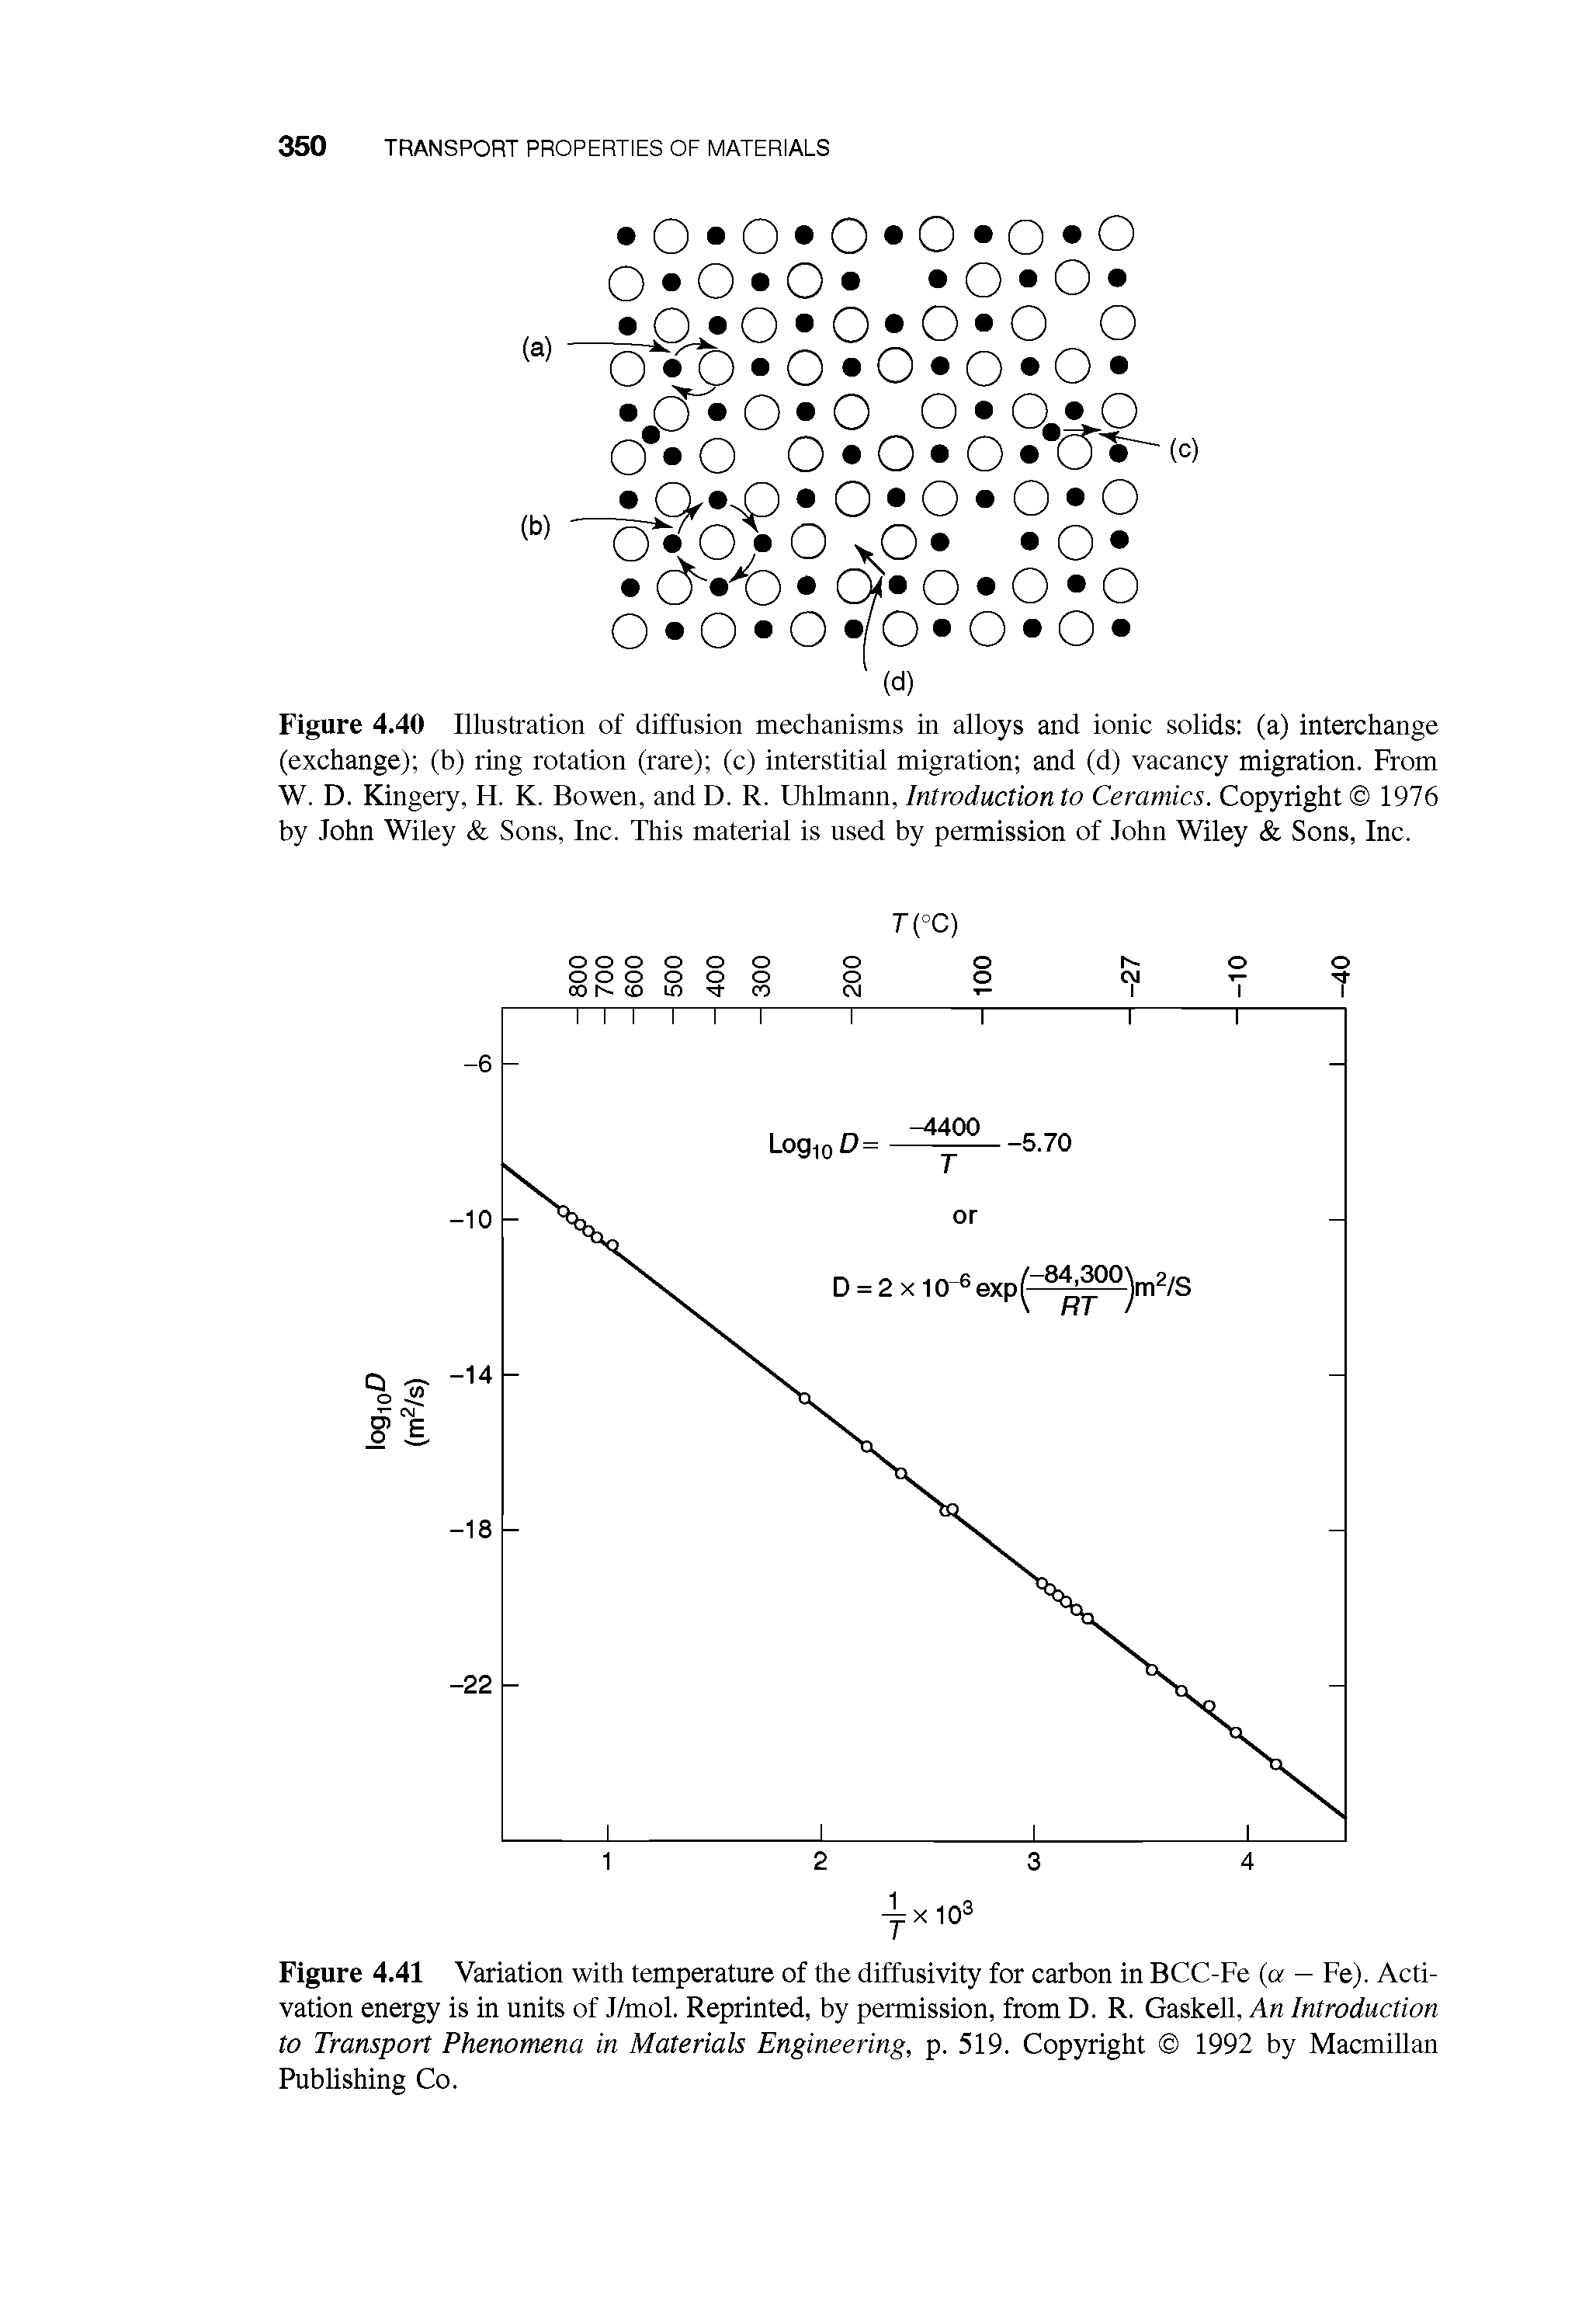 Figure 4.41 Variation with temperature of the diffusivity for carbon in BCC-Fe (a — Fe). Activation energy is in units of J/mol. Reprinted, by permission, from D. R. Gaskell, An Introduction to Transport Phenomena in Materials Engineering, p. 519. Copyright 1992 by Macmillan Publishing Co.